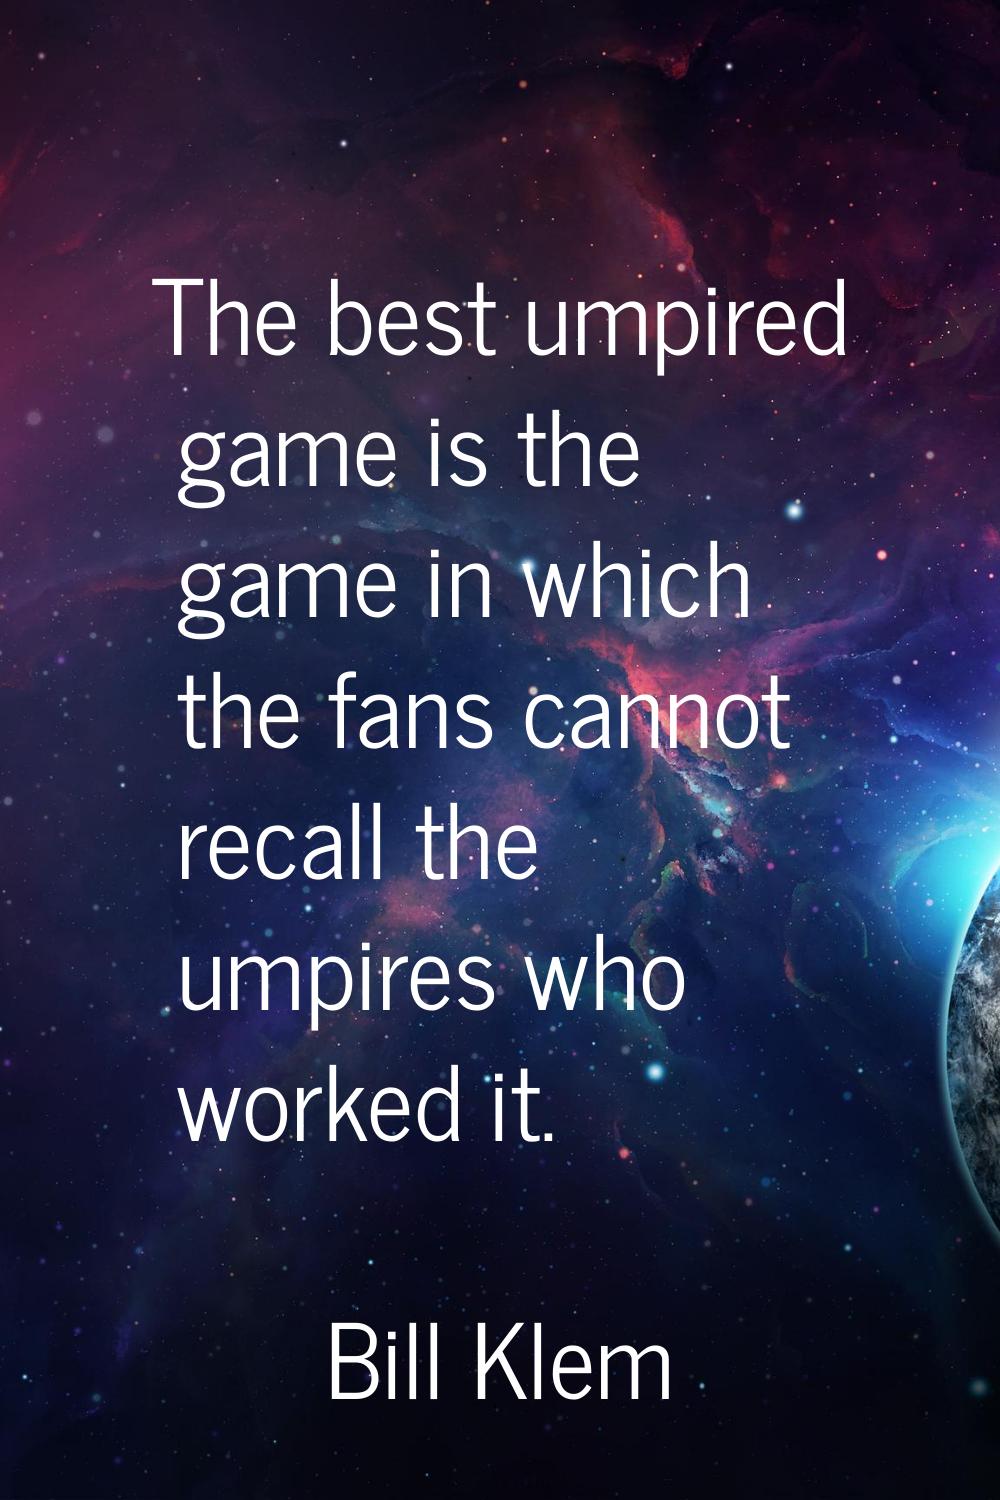 The best umpired game is the game in which the fans cannot recall the umpires who worked it.